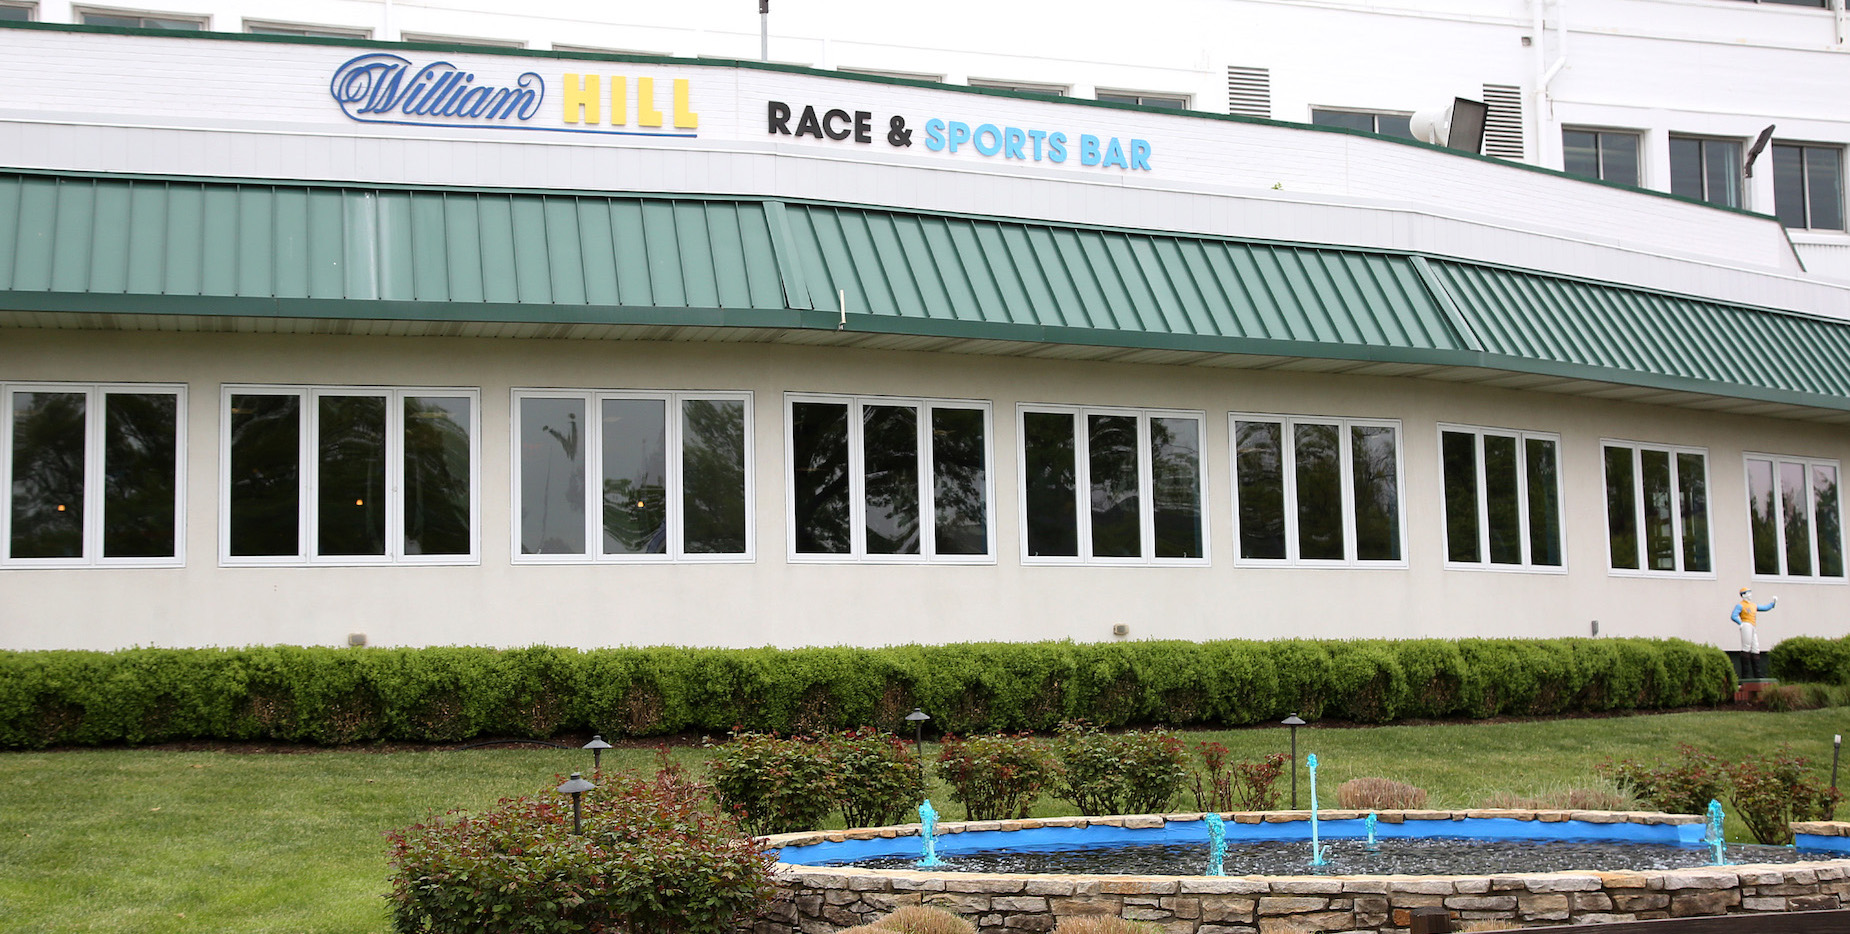 The William Hill facility at Monmouth Park in Oceanport, New Jersey. Photo: Bill Denver/EQUI-PHOTO